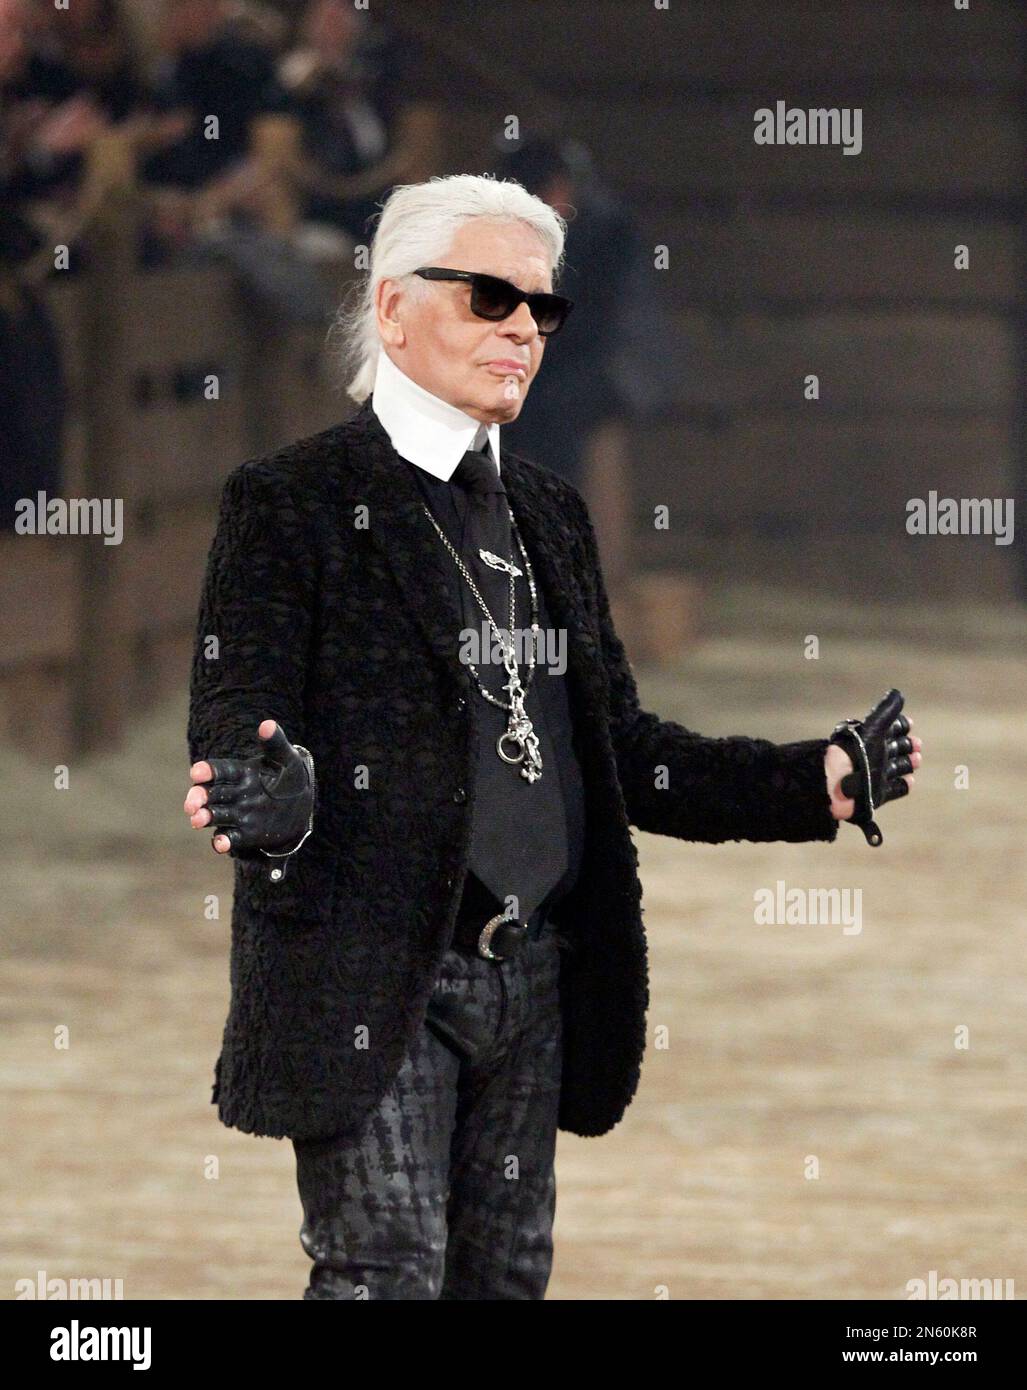 When Karl Came to Chanel – WWD